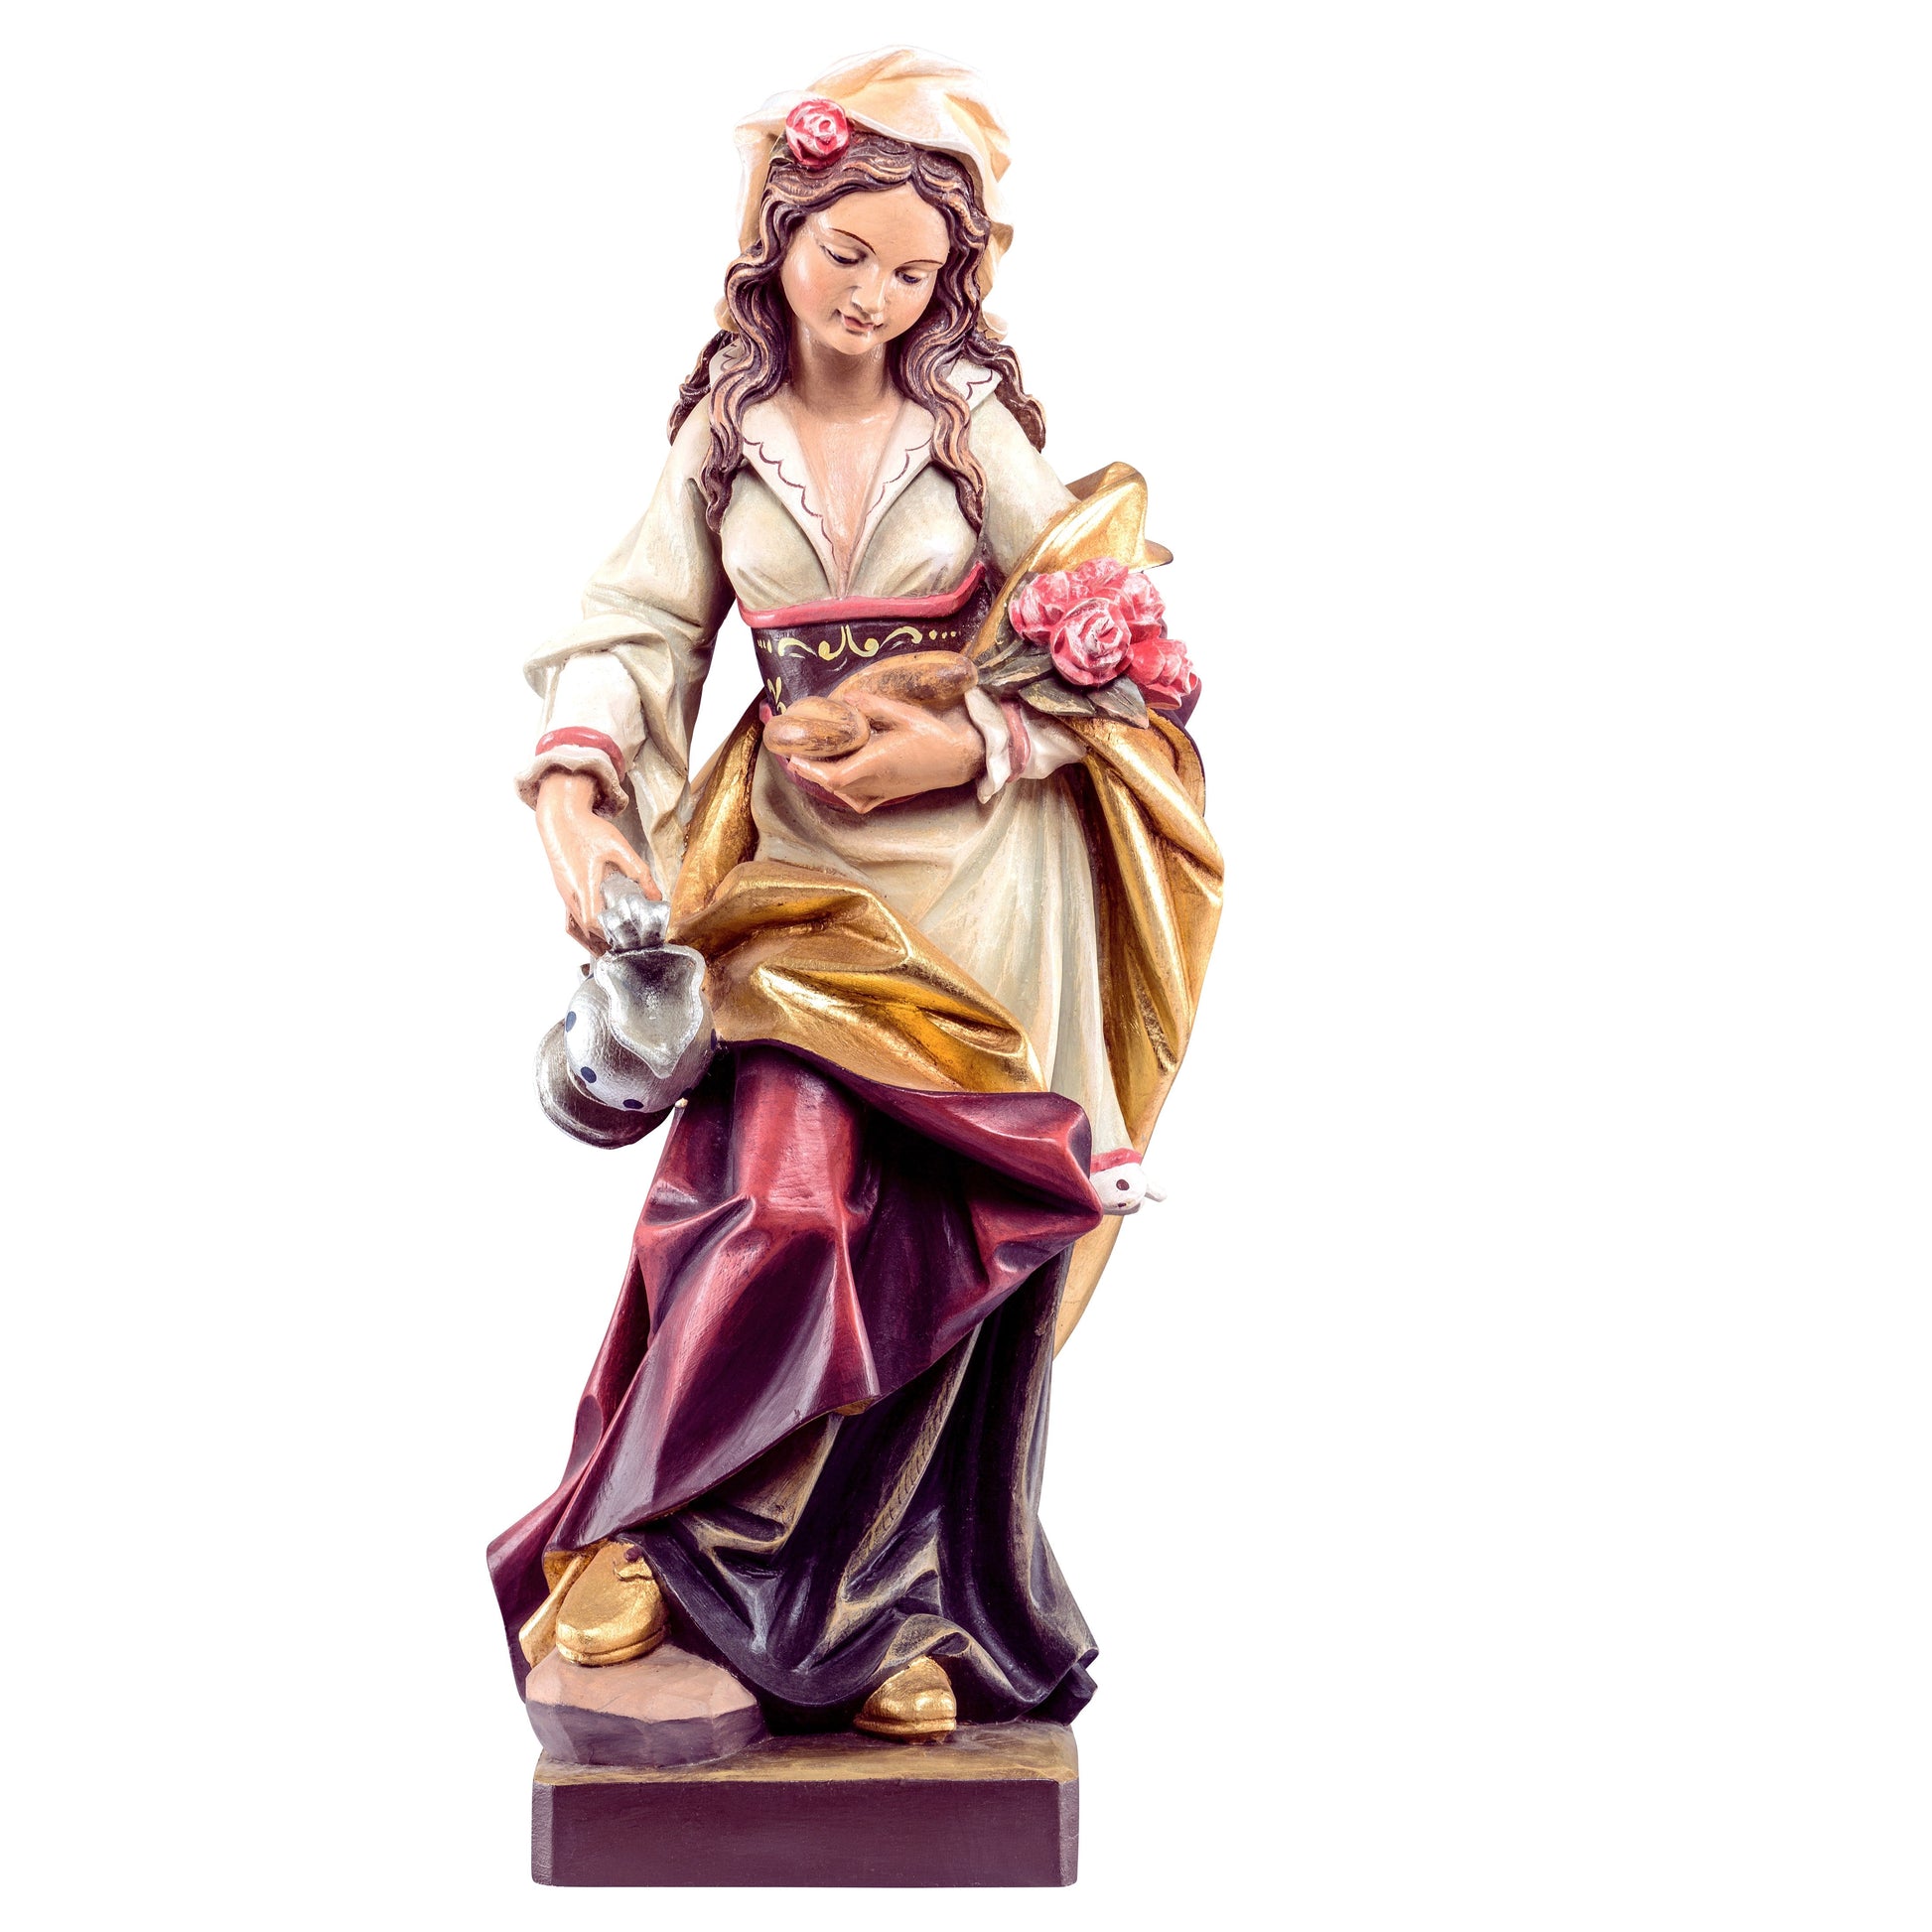 Mondo Cattolico Antiqued / 50 cm (19.7 in) Wooden statue of St. Elizabeth with roses